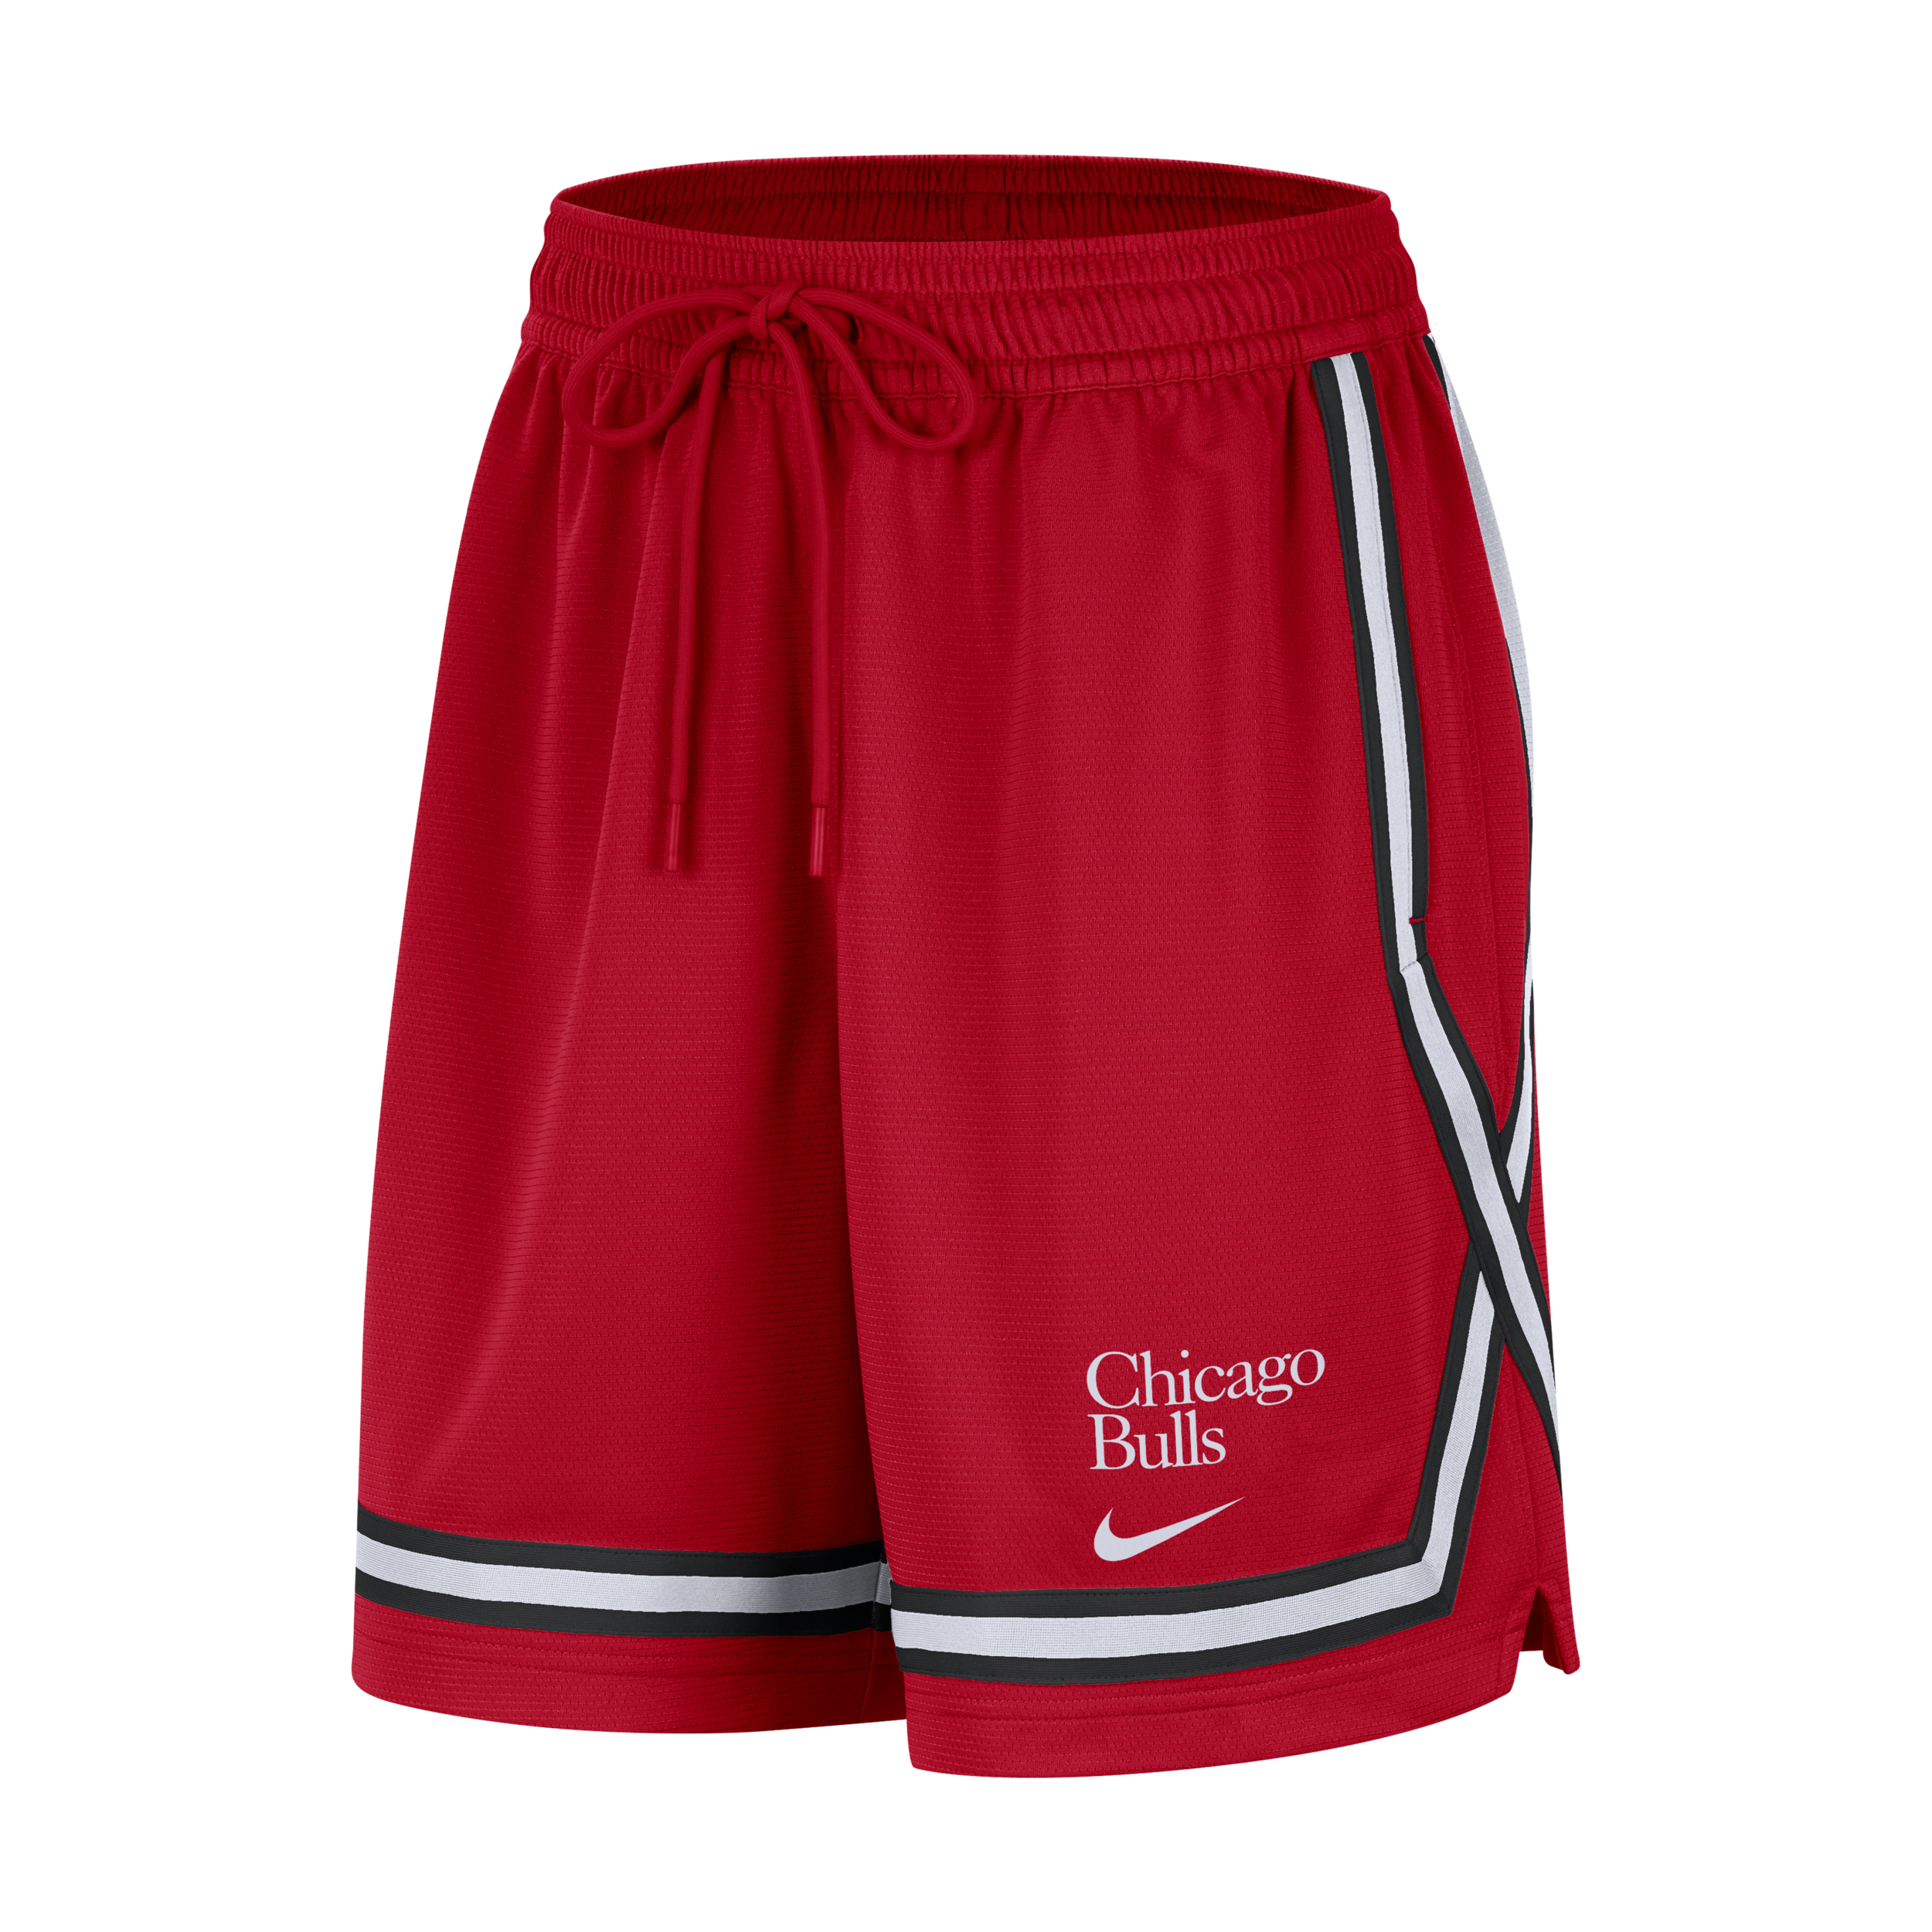 Nike Chicago Bulls Fly Crossover Dri-FIT NBA-basketbalshorts met graphic voor dames Rood